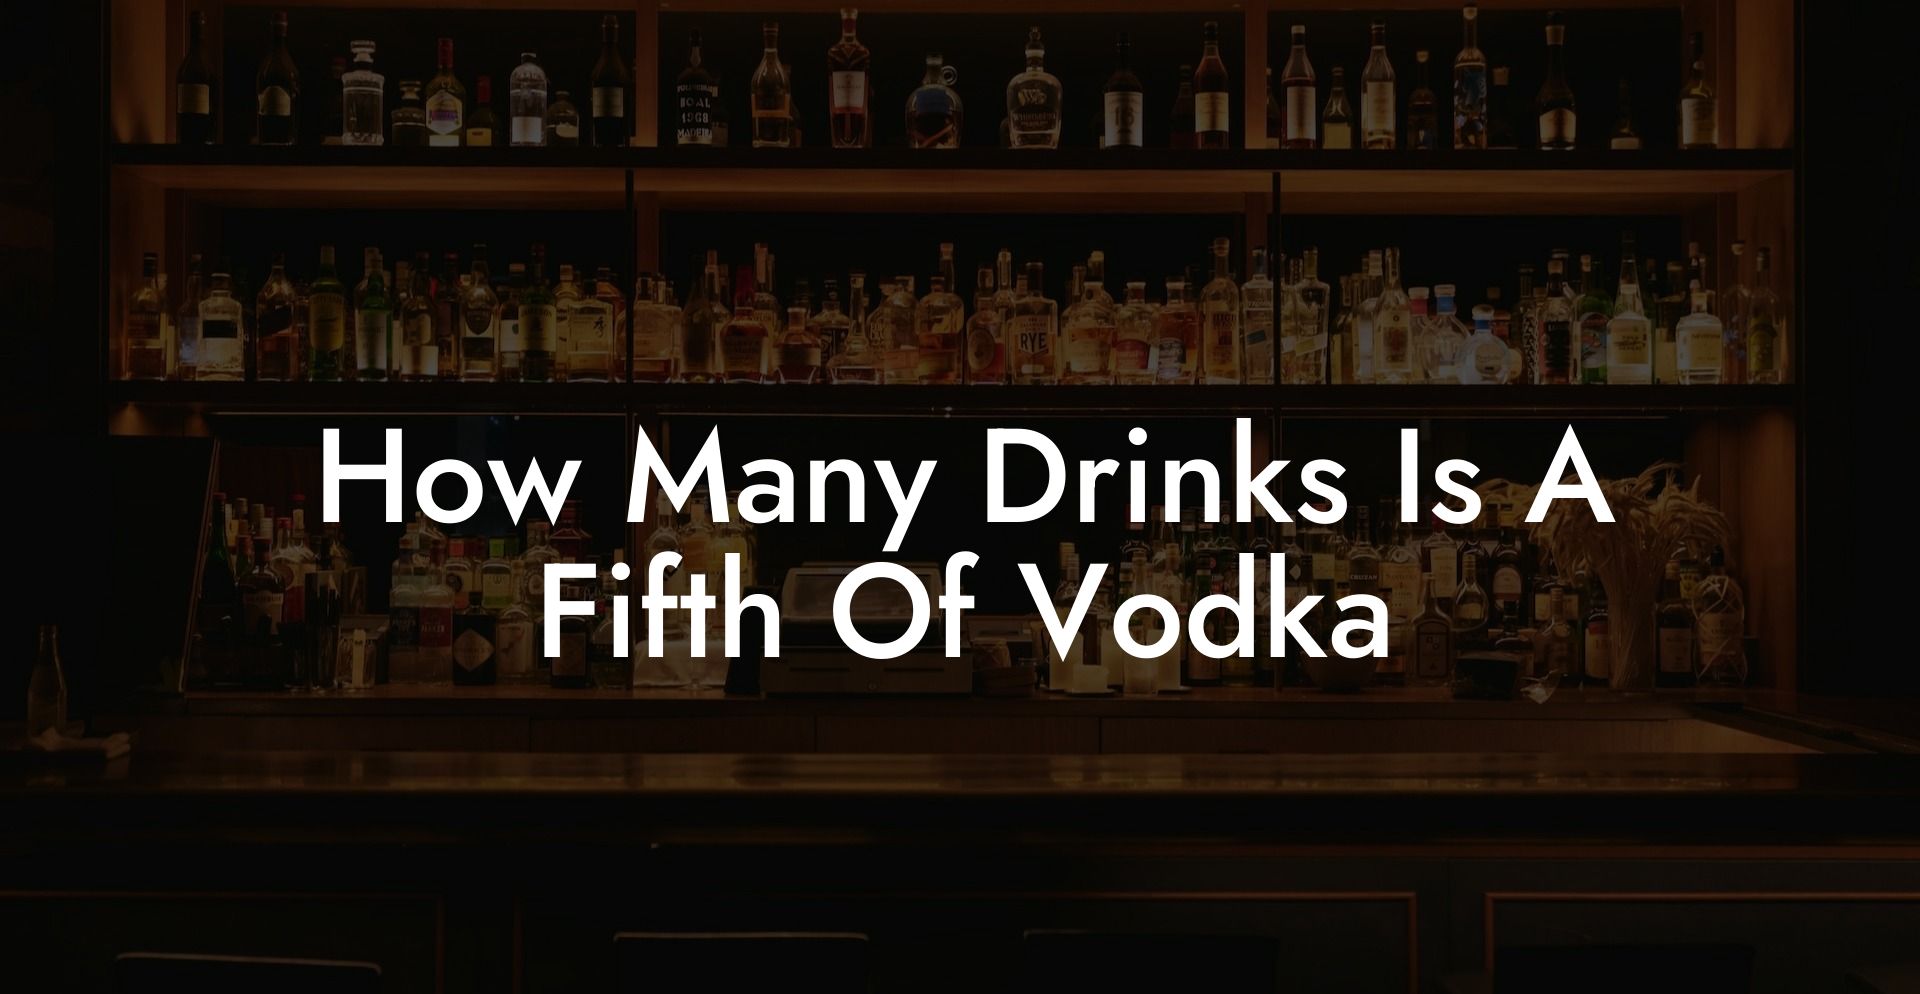 How Many Drinks Is A Fifth Of Vodka